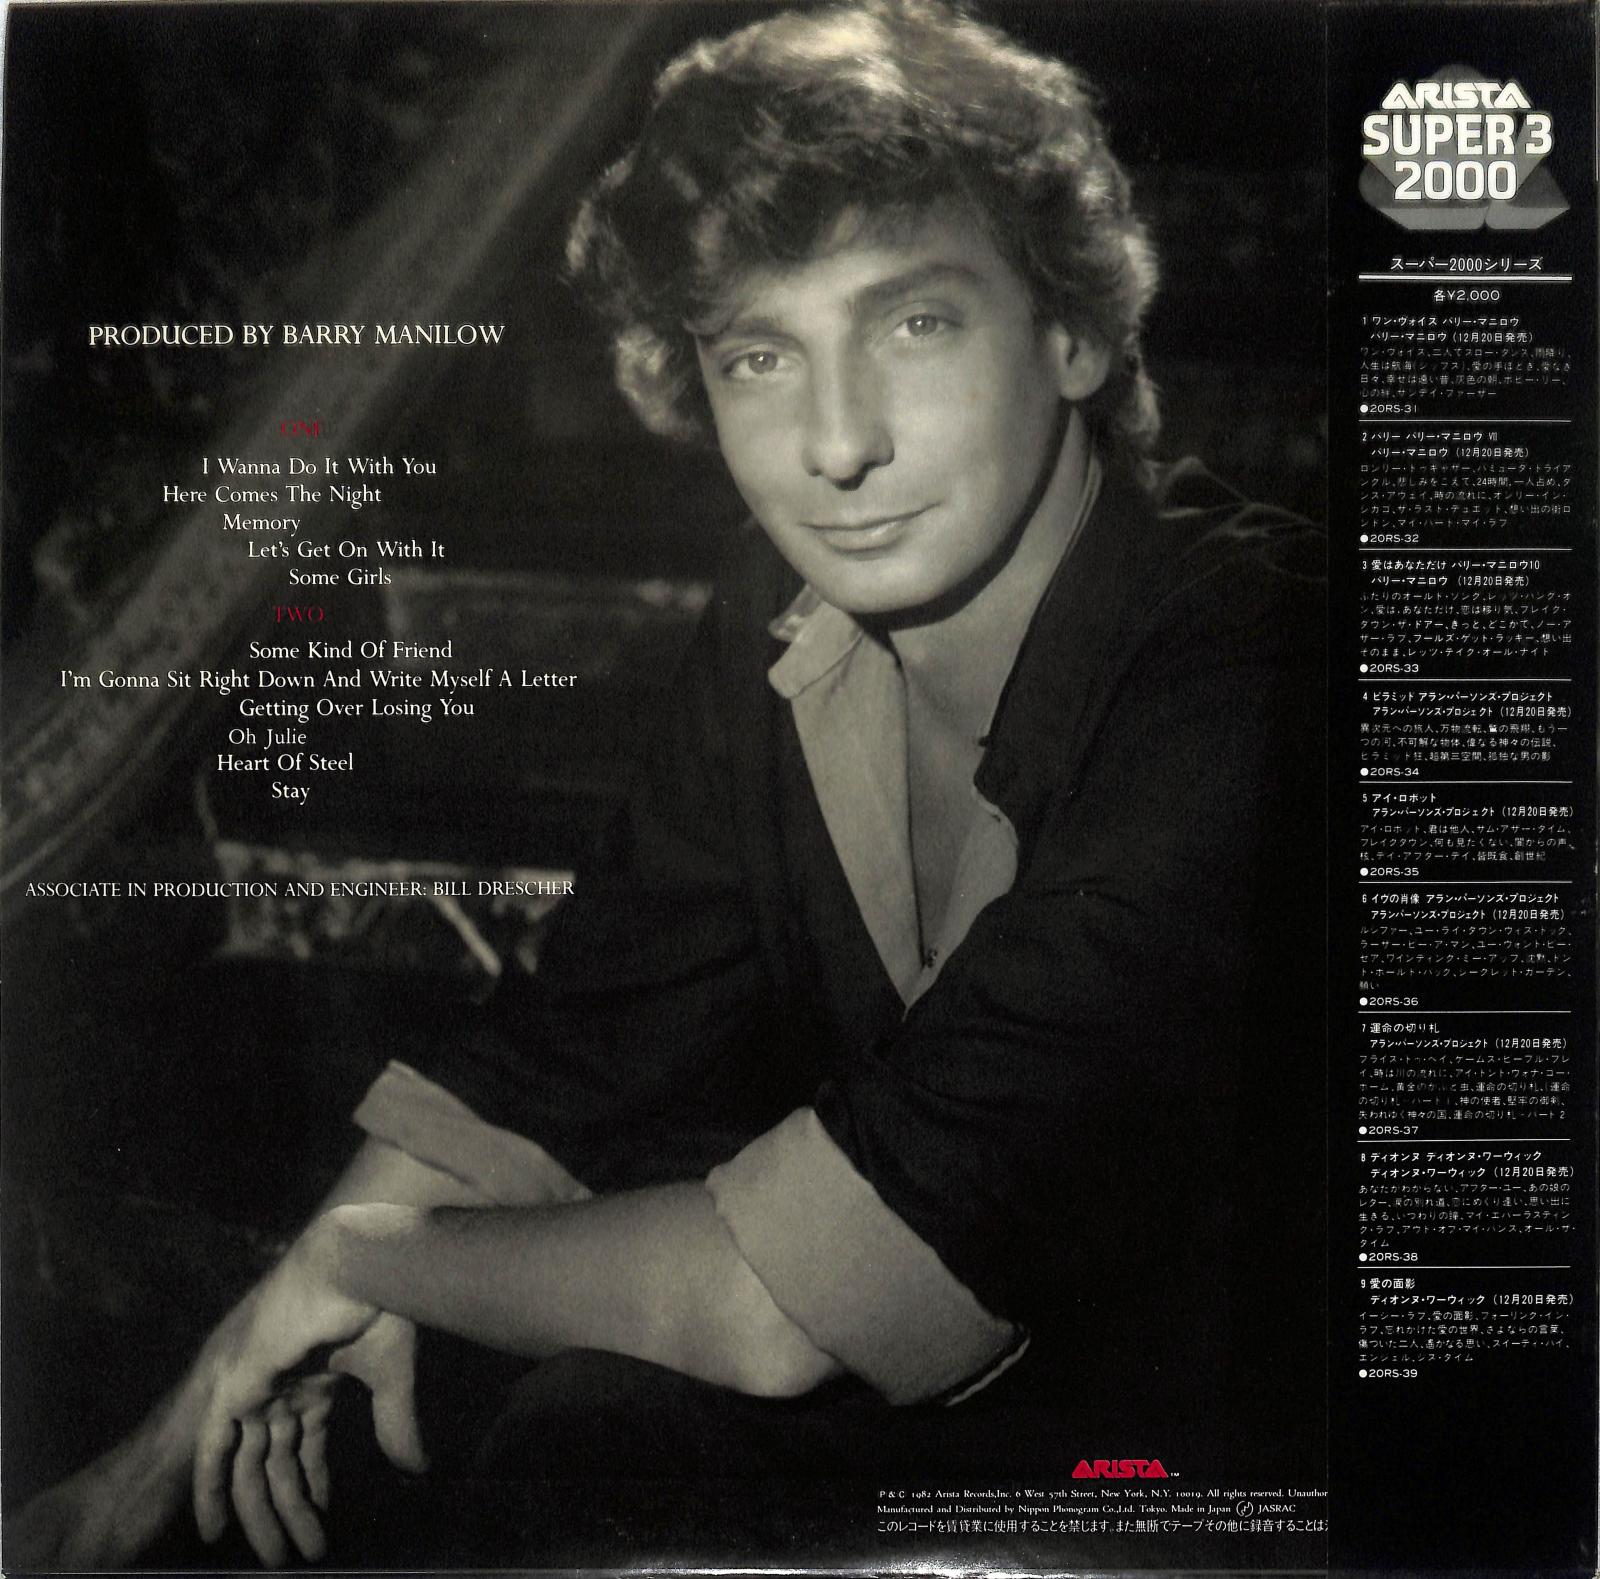 BARRY MANILOW - Here Comes The Night